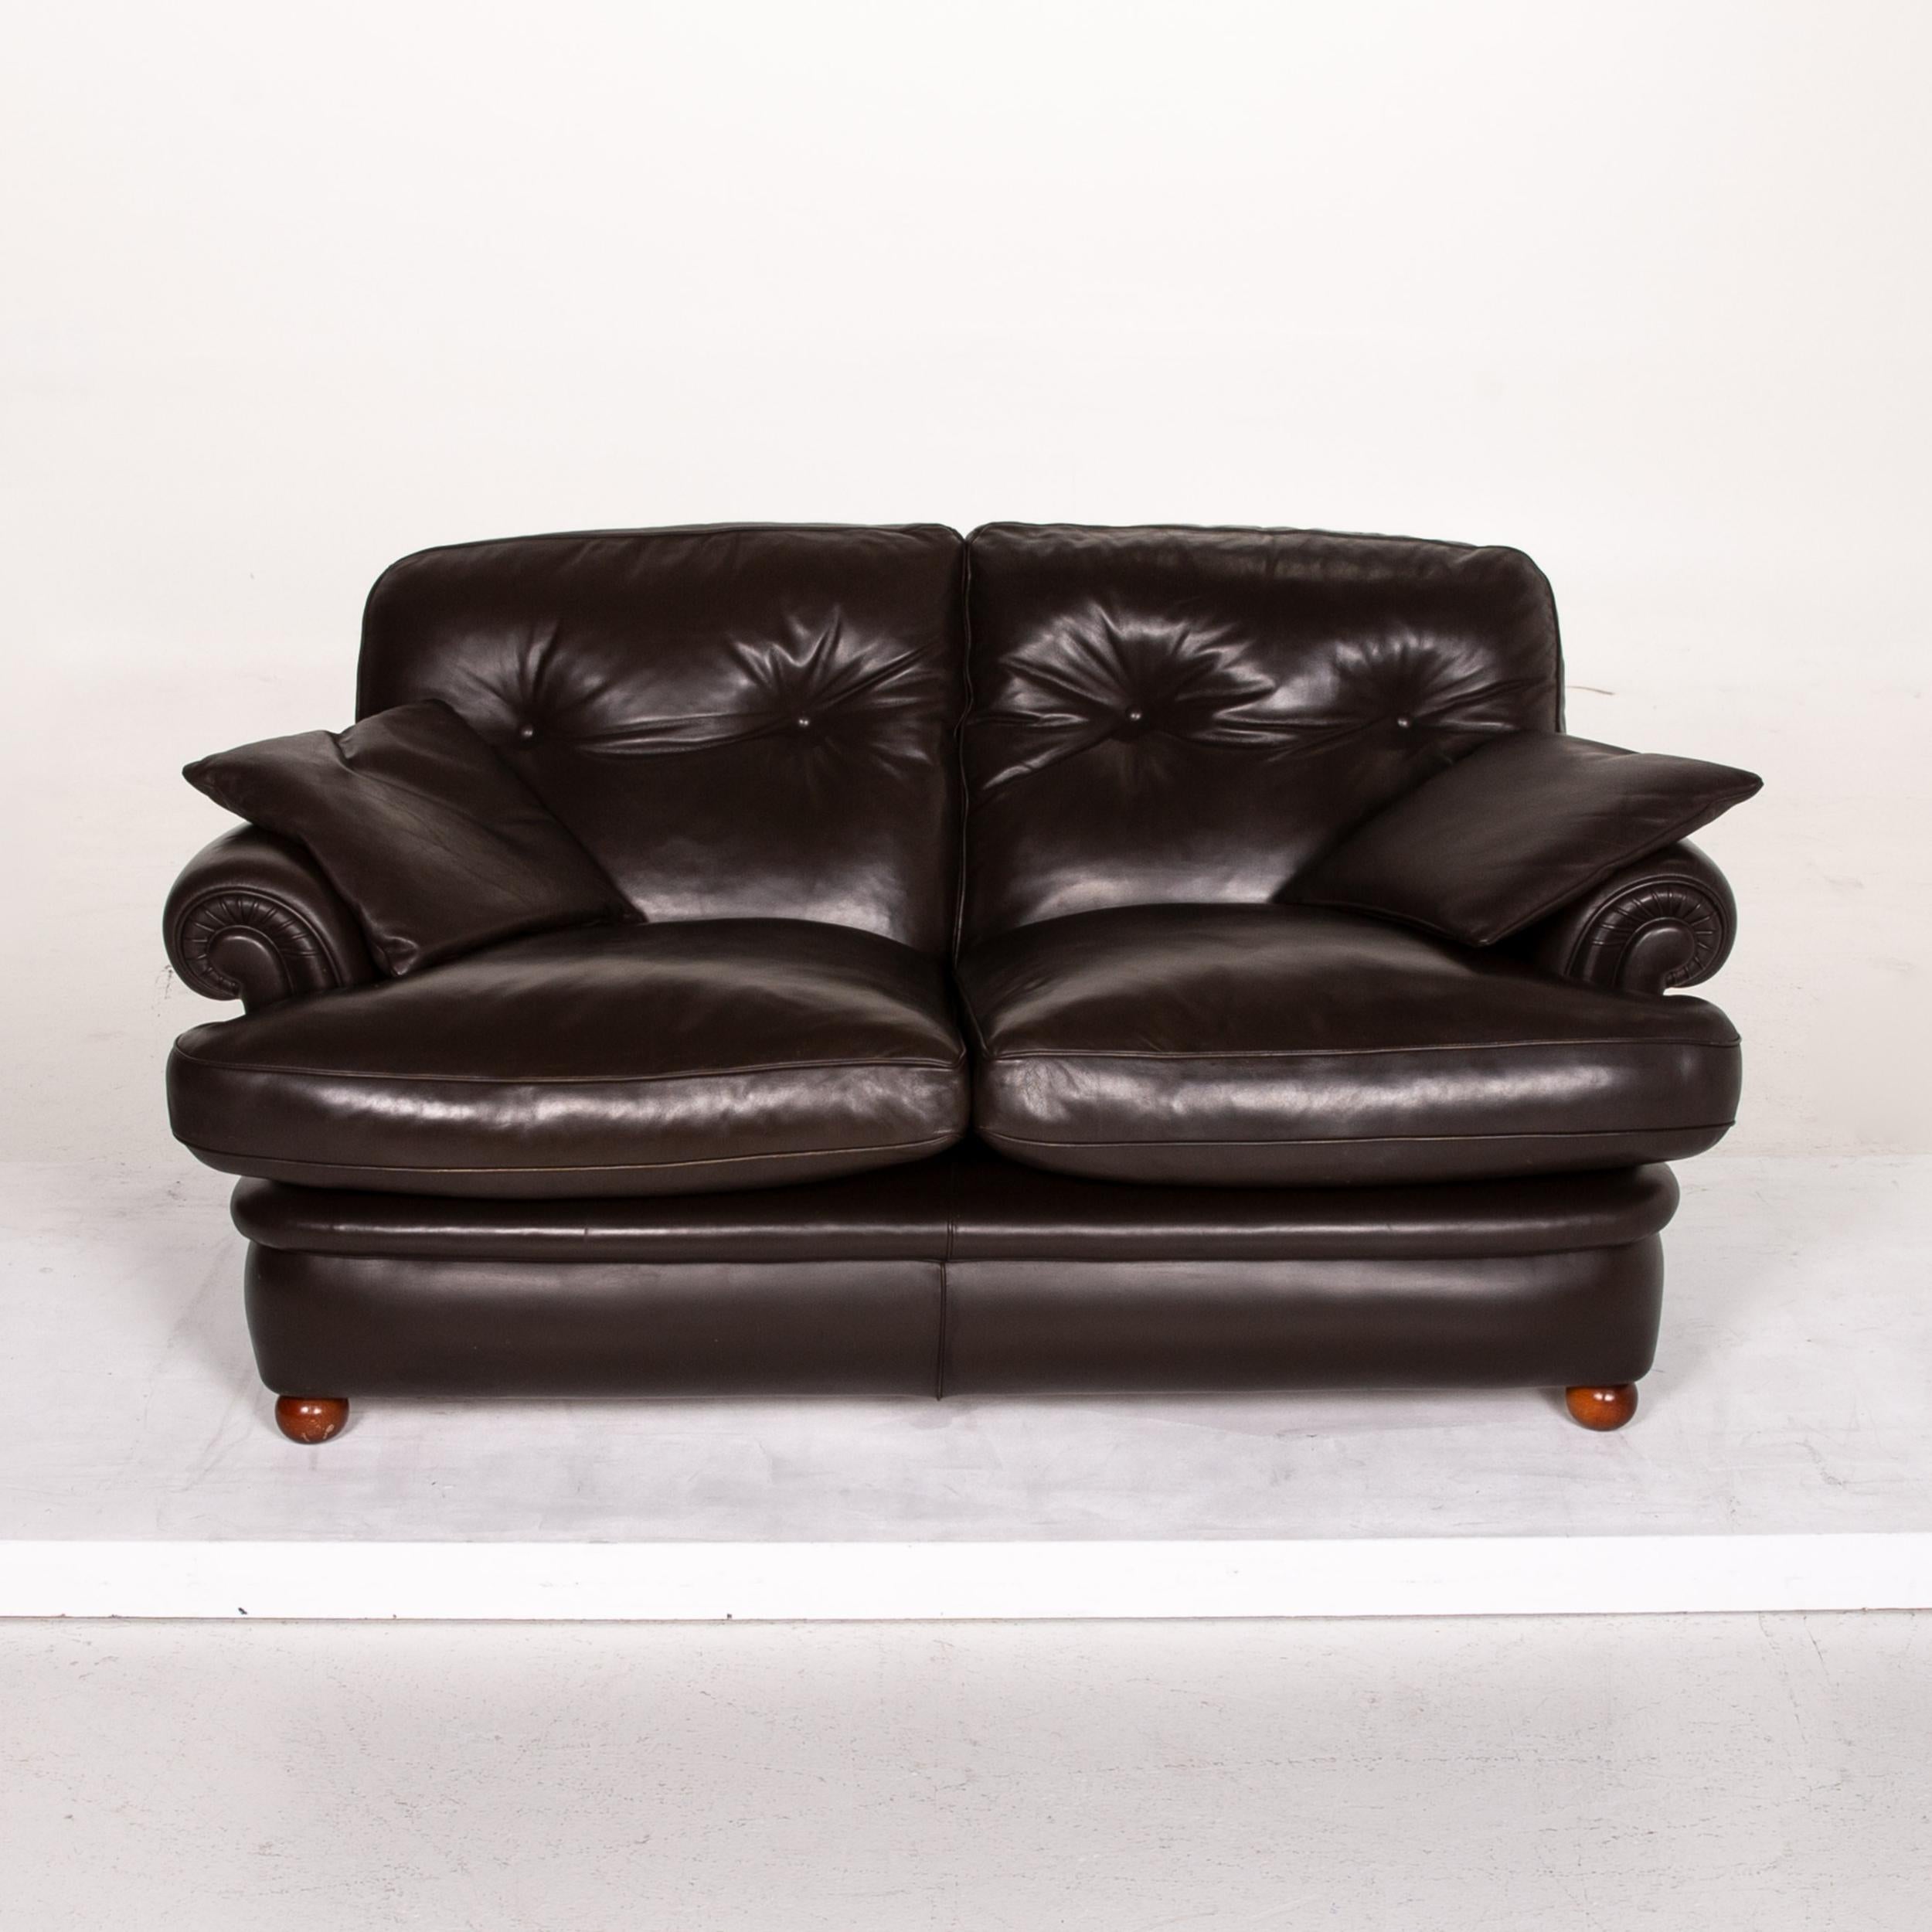 Poltrona Frau Leather Sofa Dark Brown Brown Two-Seat Couch 1